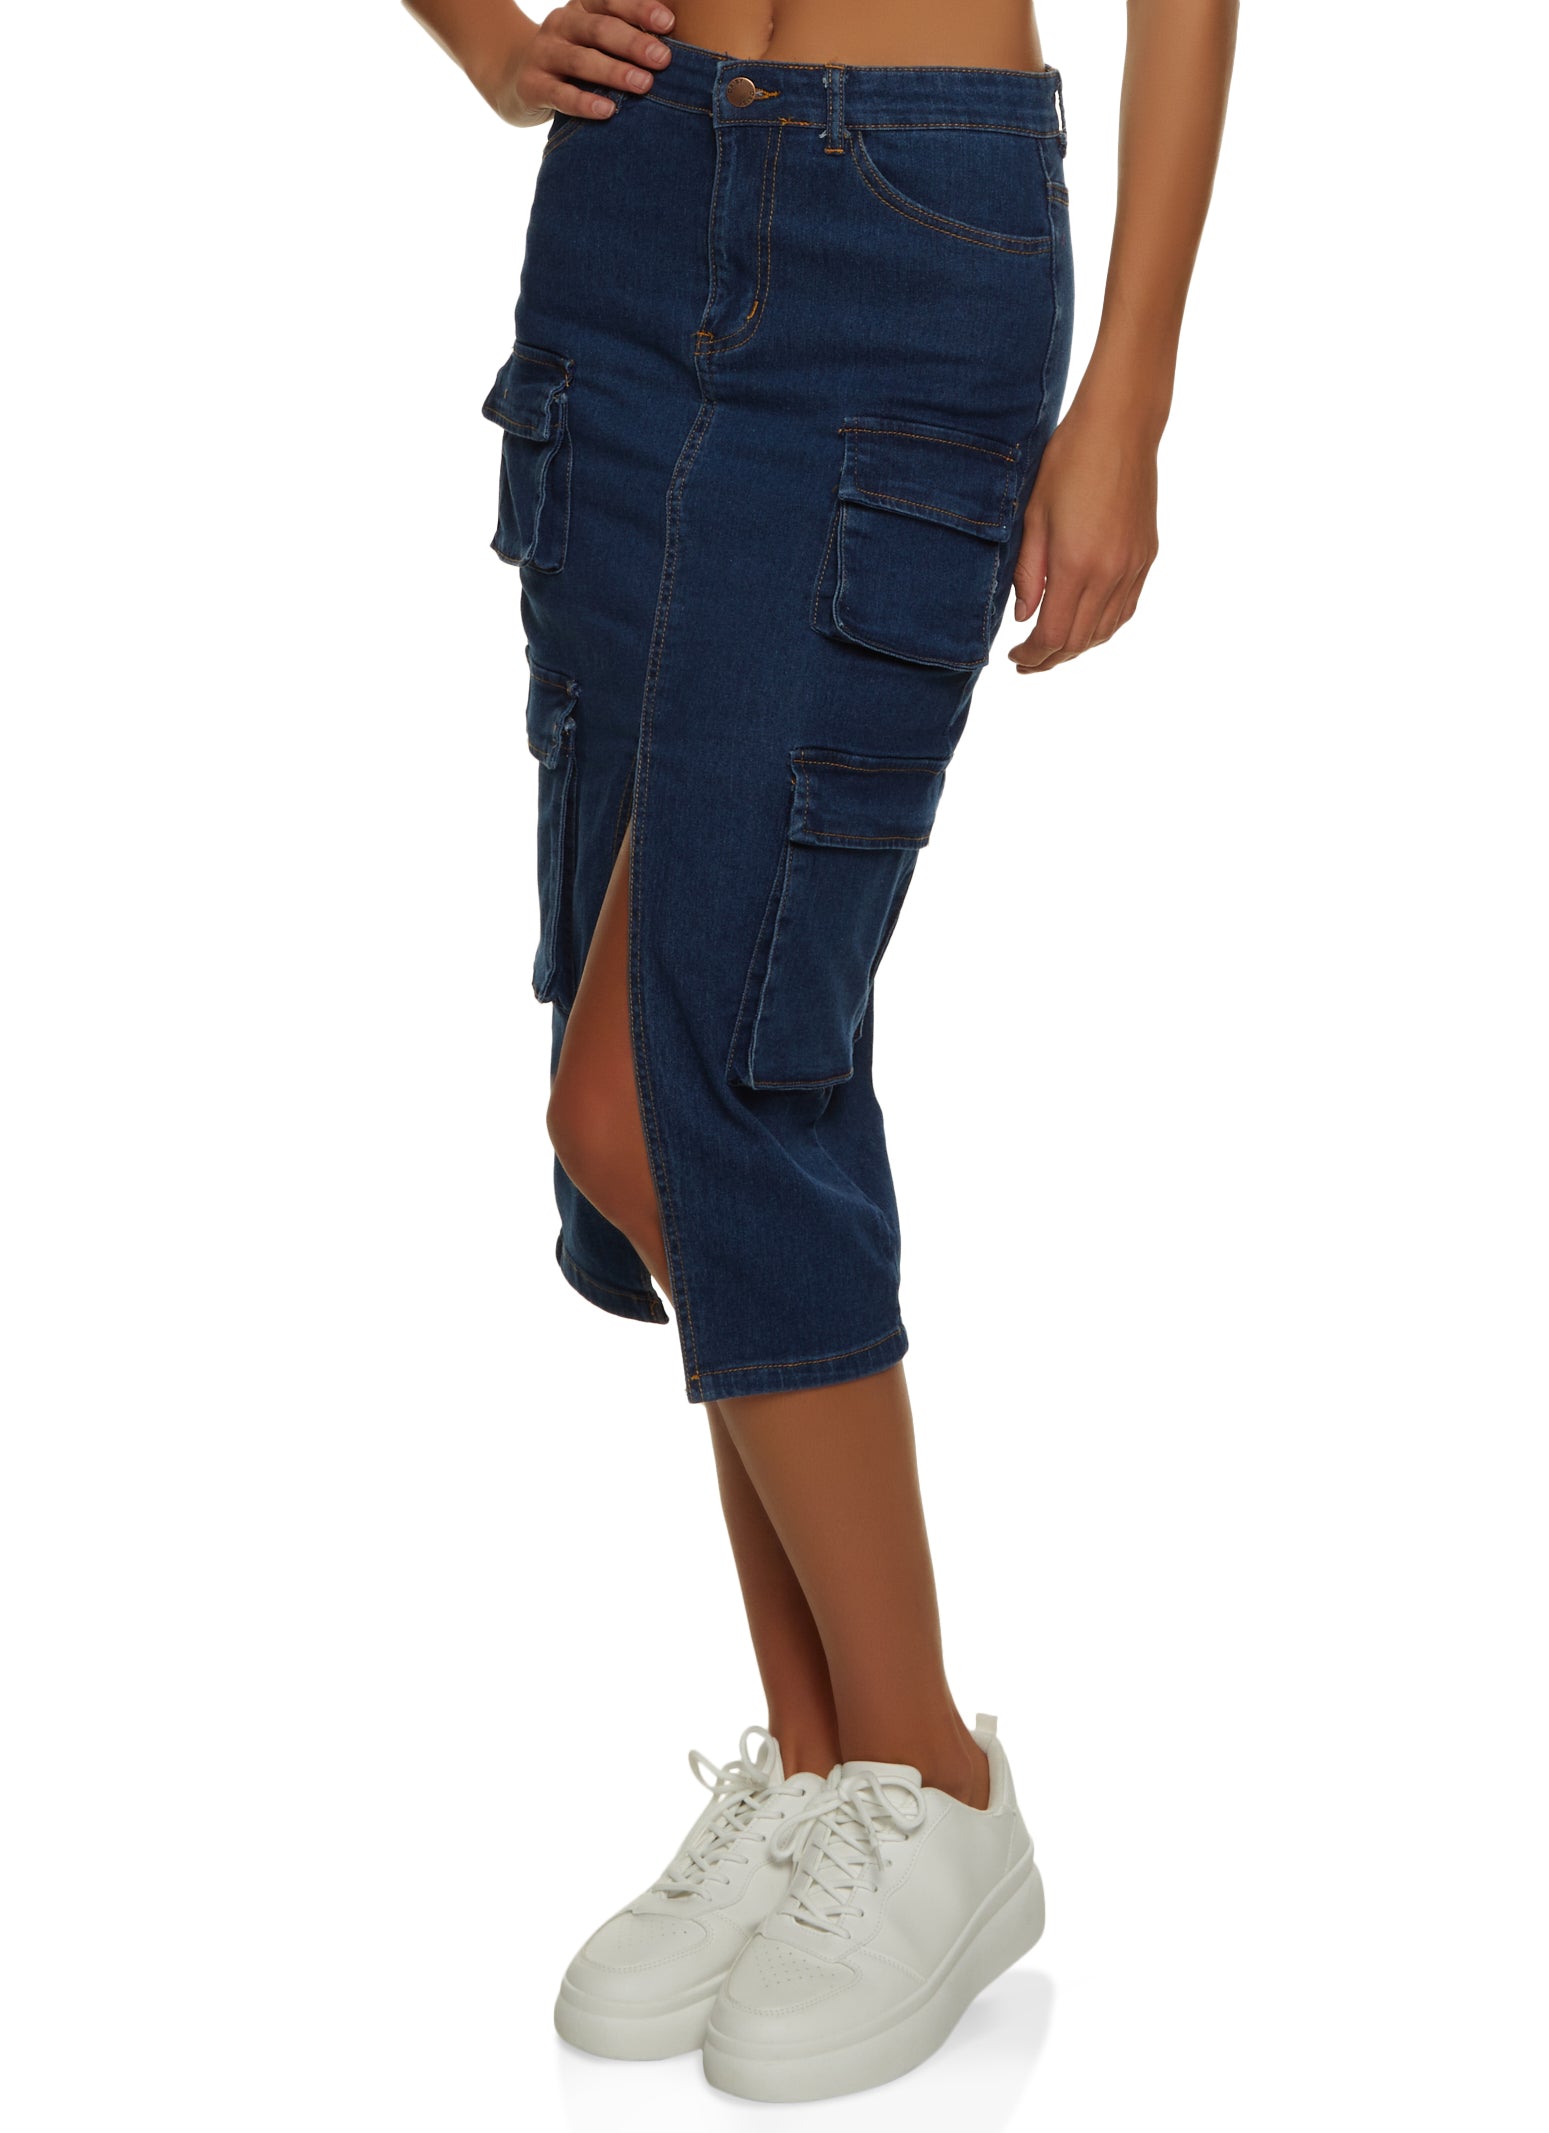 Denim Skirt With Built In Shorts Pockets On Back And Front Easy